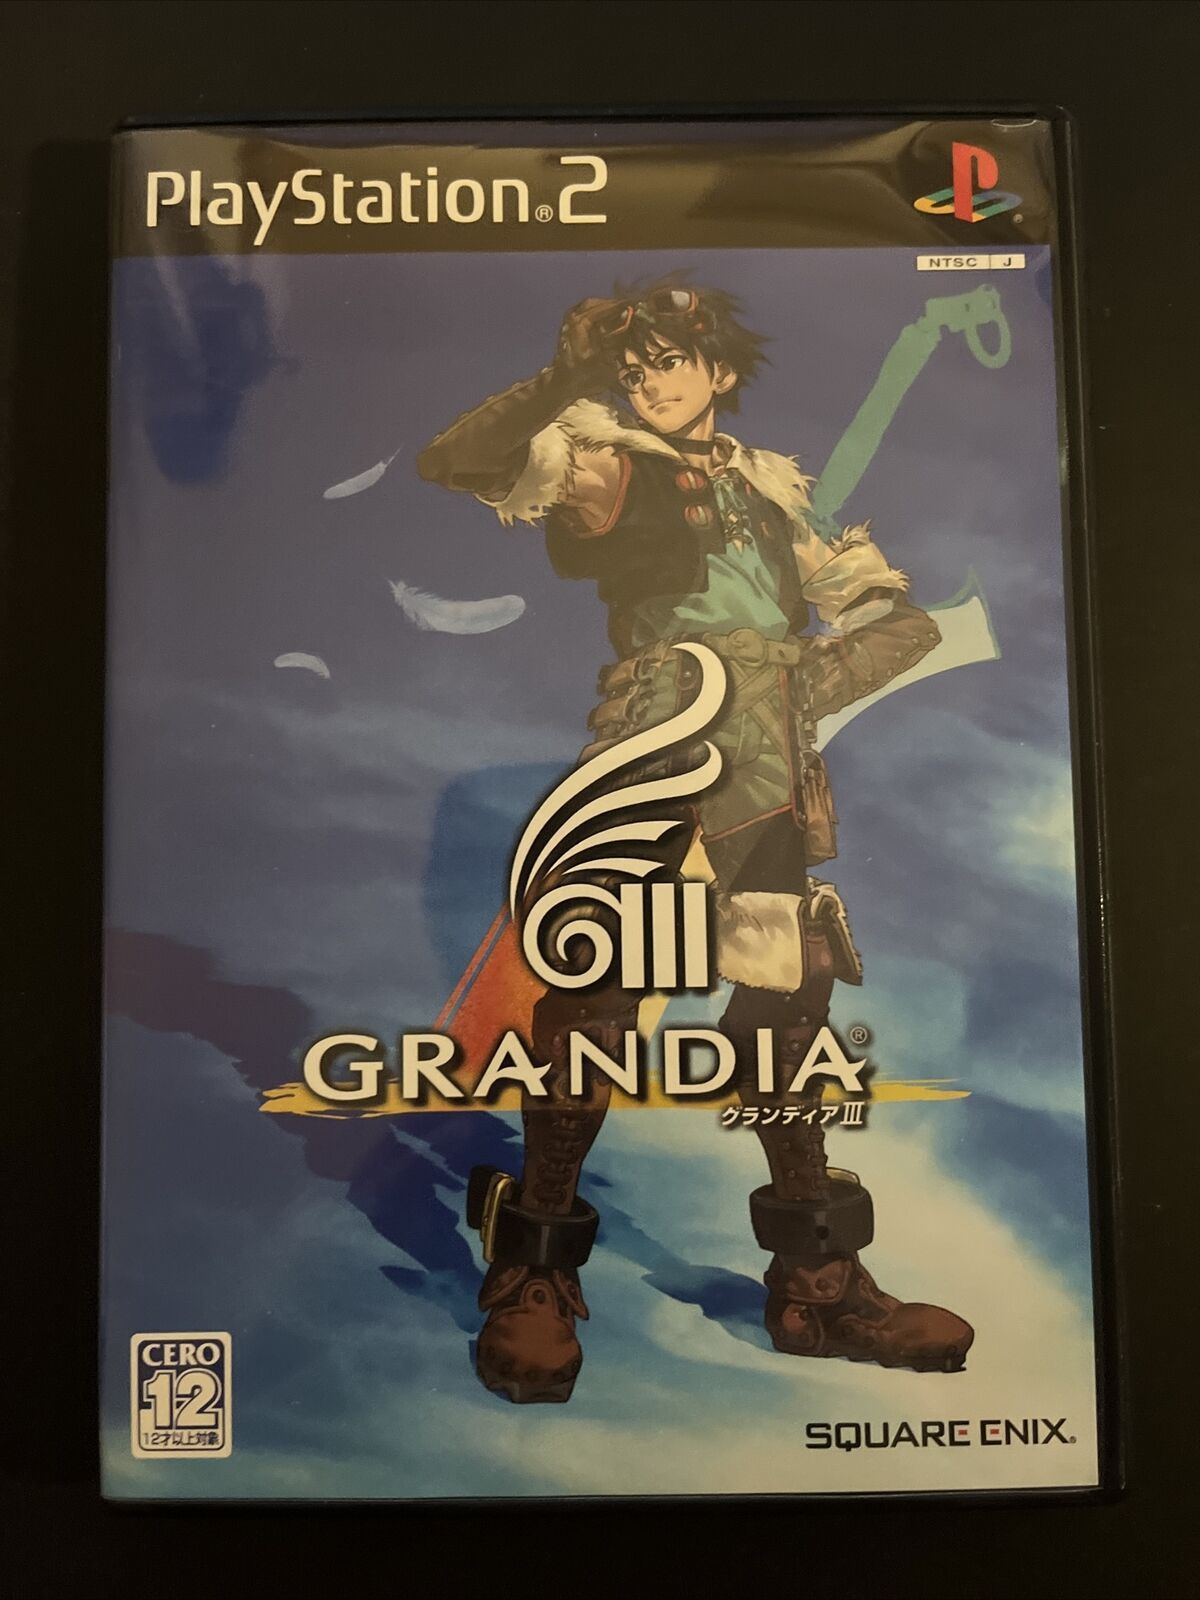 Grandia 3 - PlayStation 2 PS2 NTSC-J JAPAN RPG Game Complete with Manual